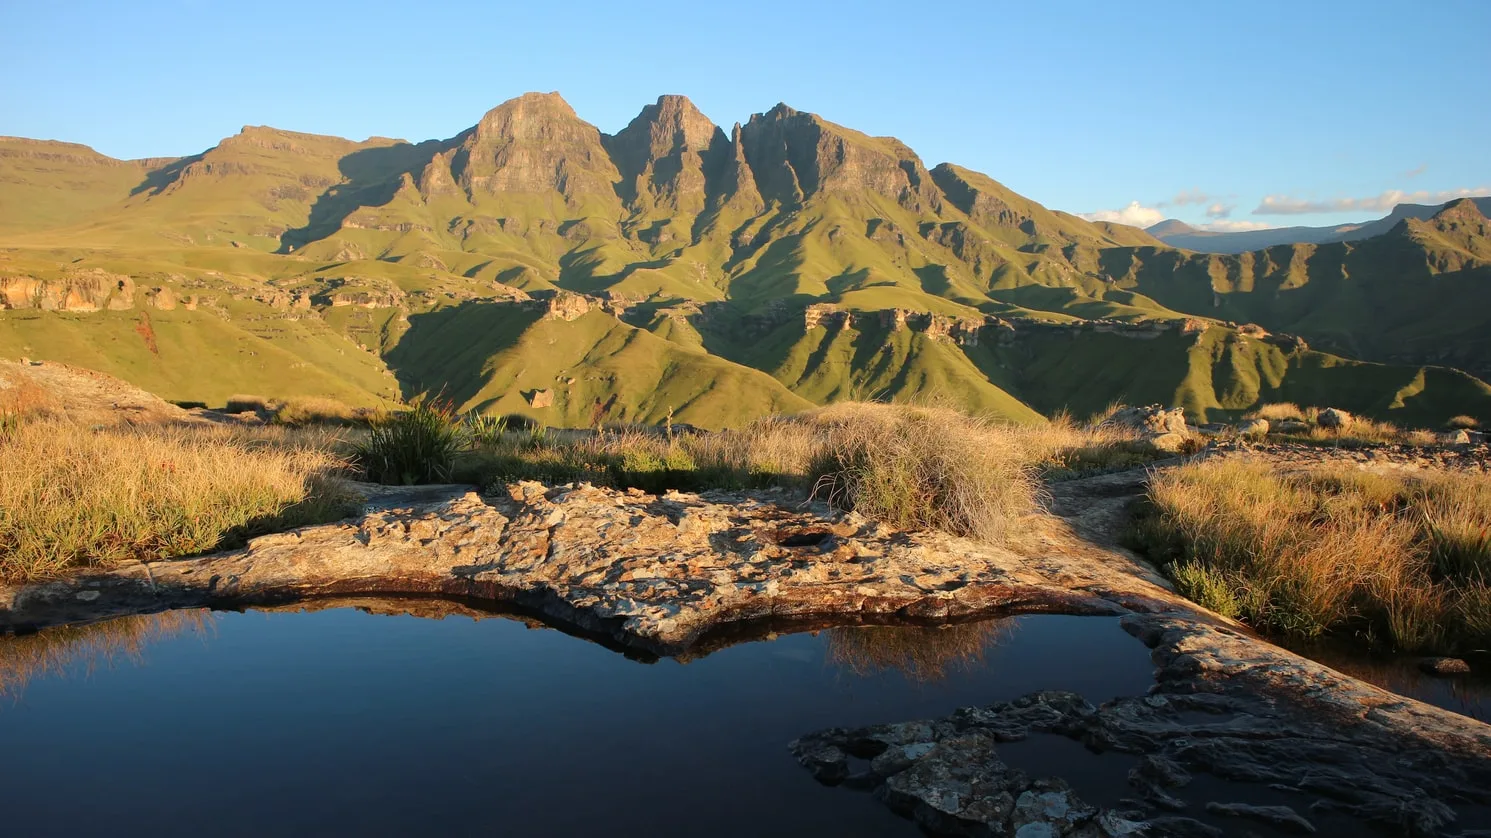 A Guide To The 10 UNESCO World Heritage Sites In South Africa